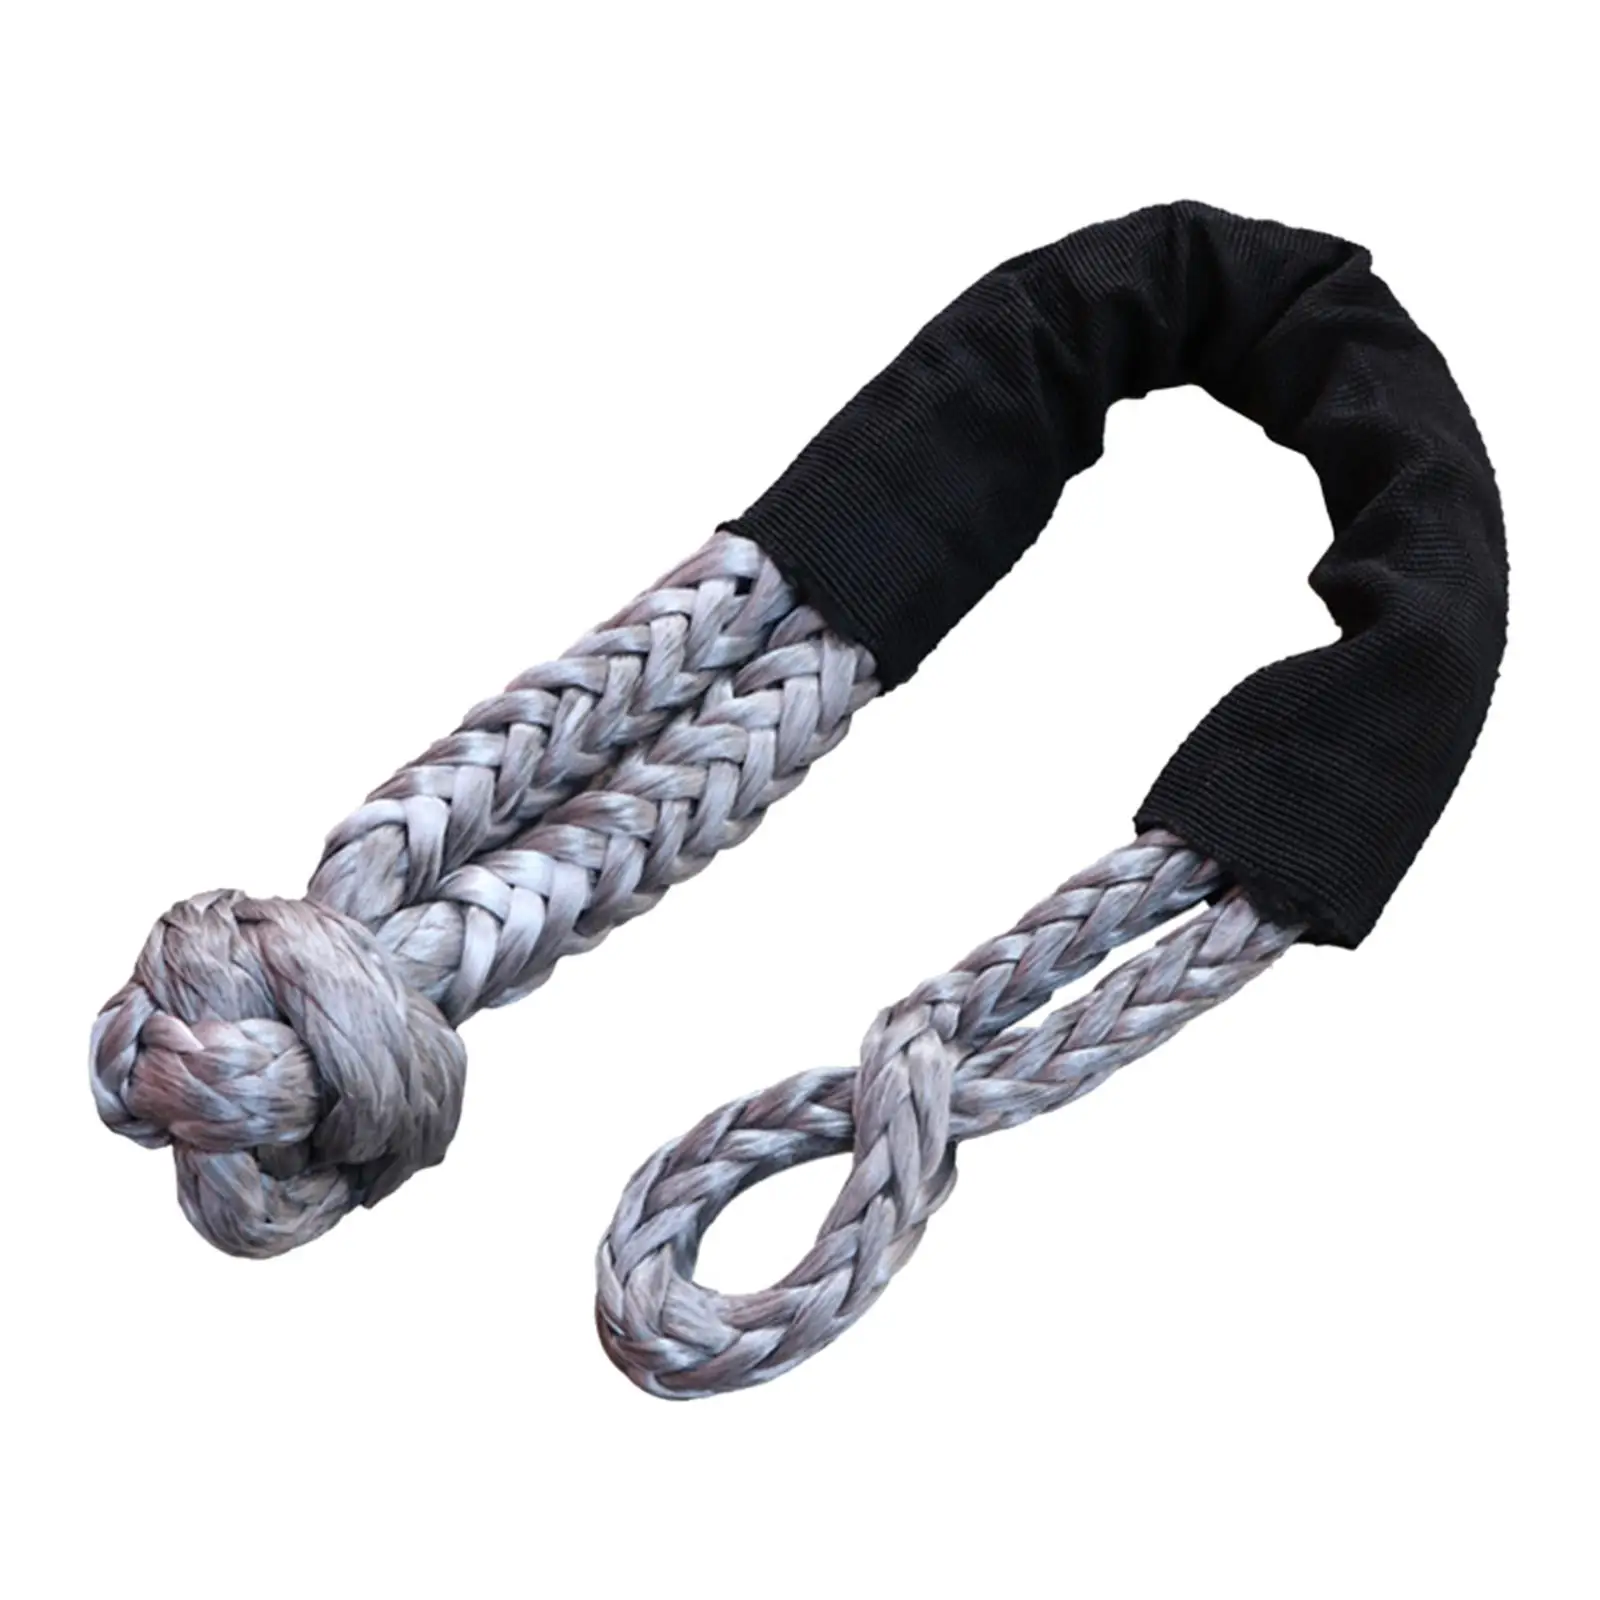 Soft Shackle Strong Easy to Use Oxford Cloth Fiber Versatile Tow Rope for Towing ATV UTV Vehicles Winches Trucks